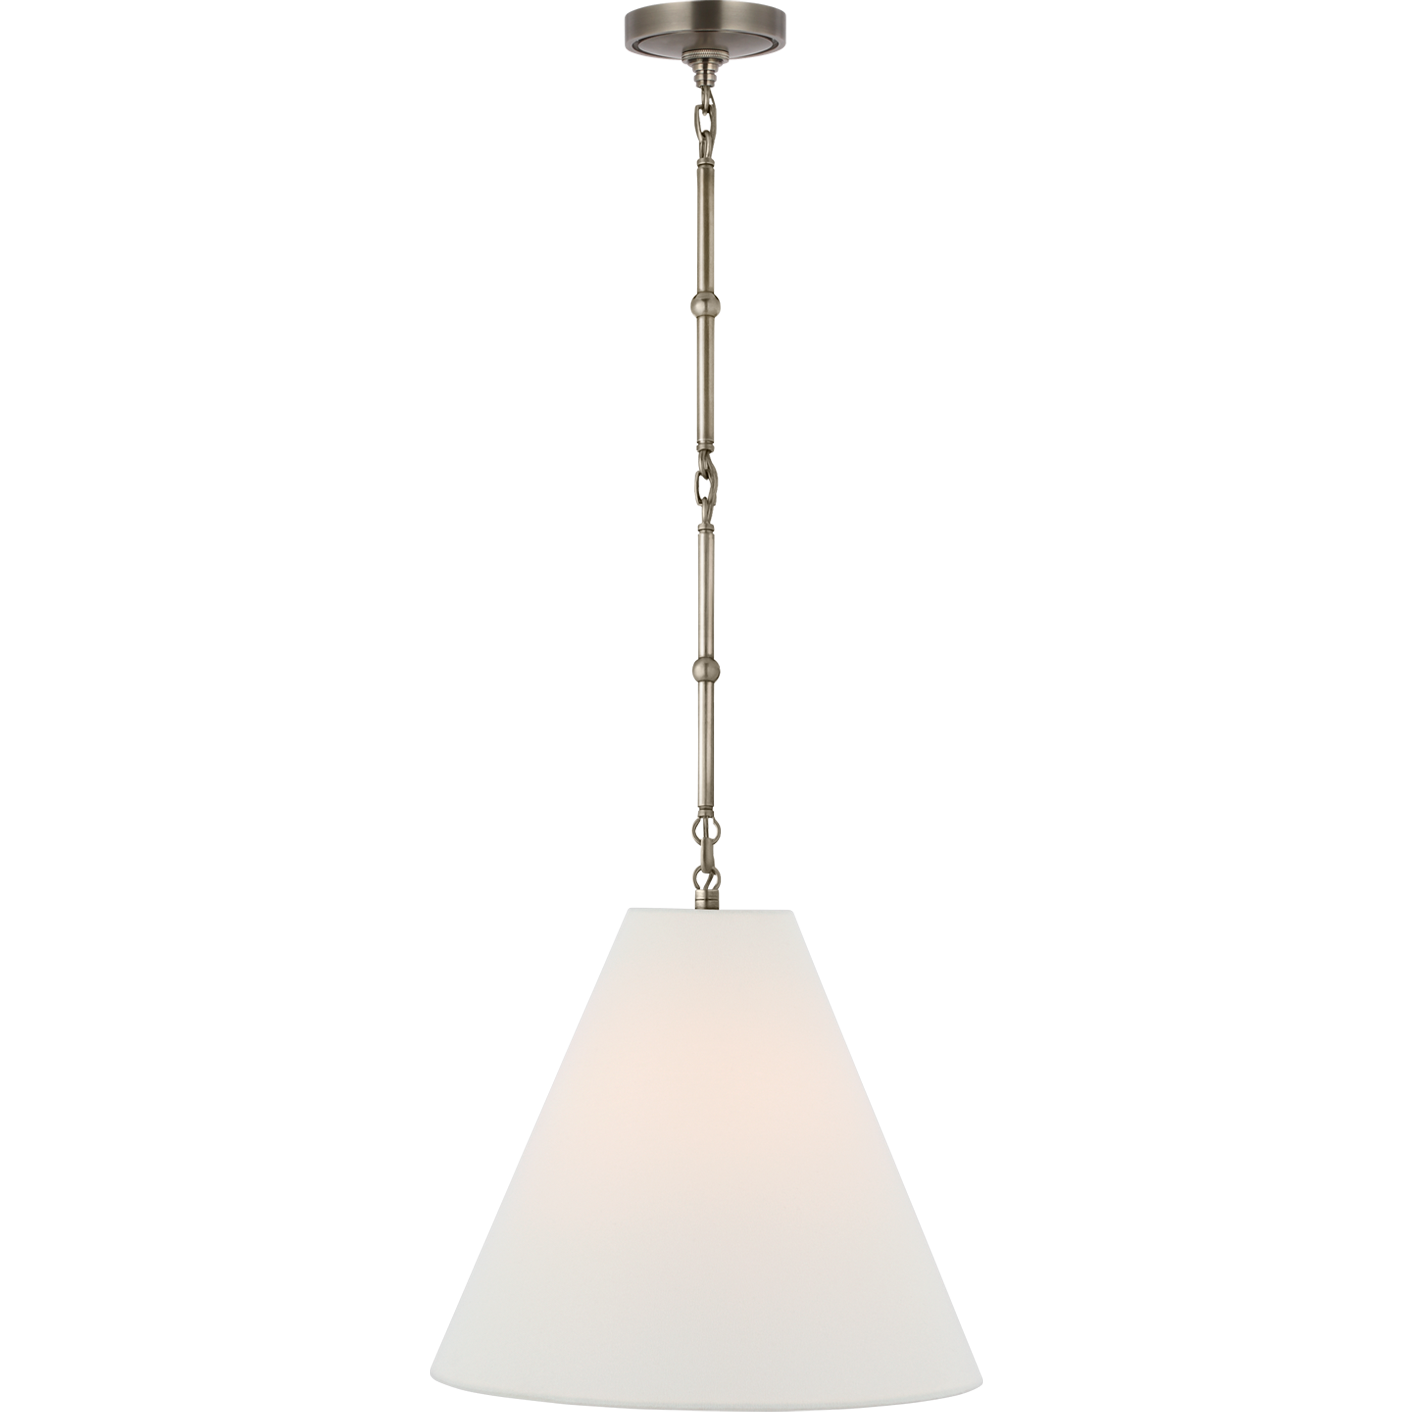 Goodman Small Hanging Light with Linen Shade